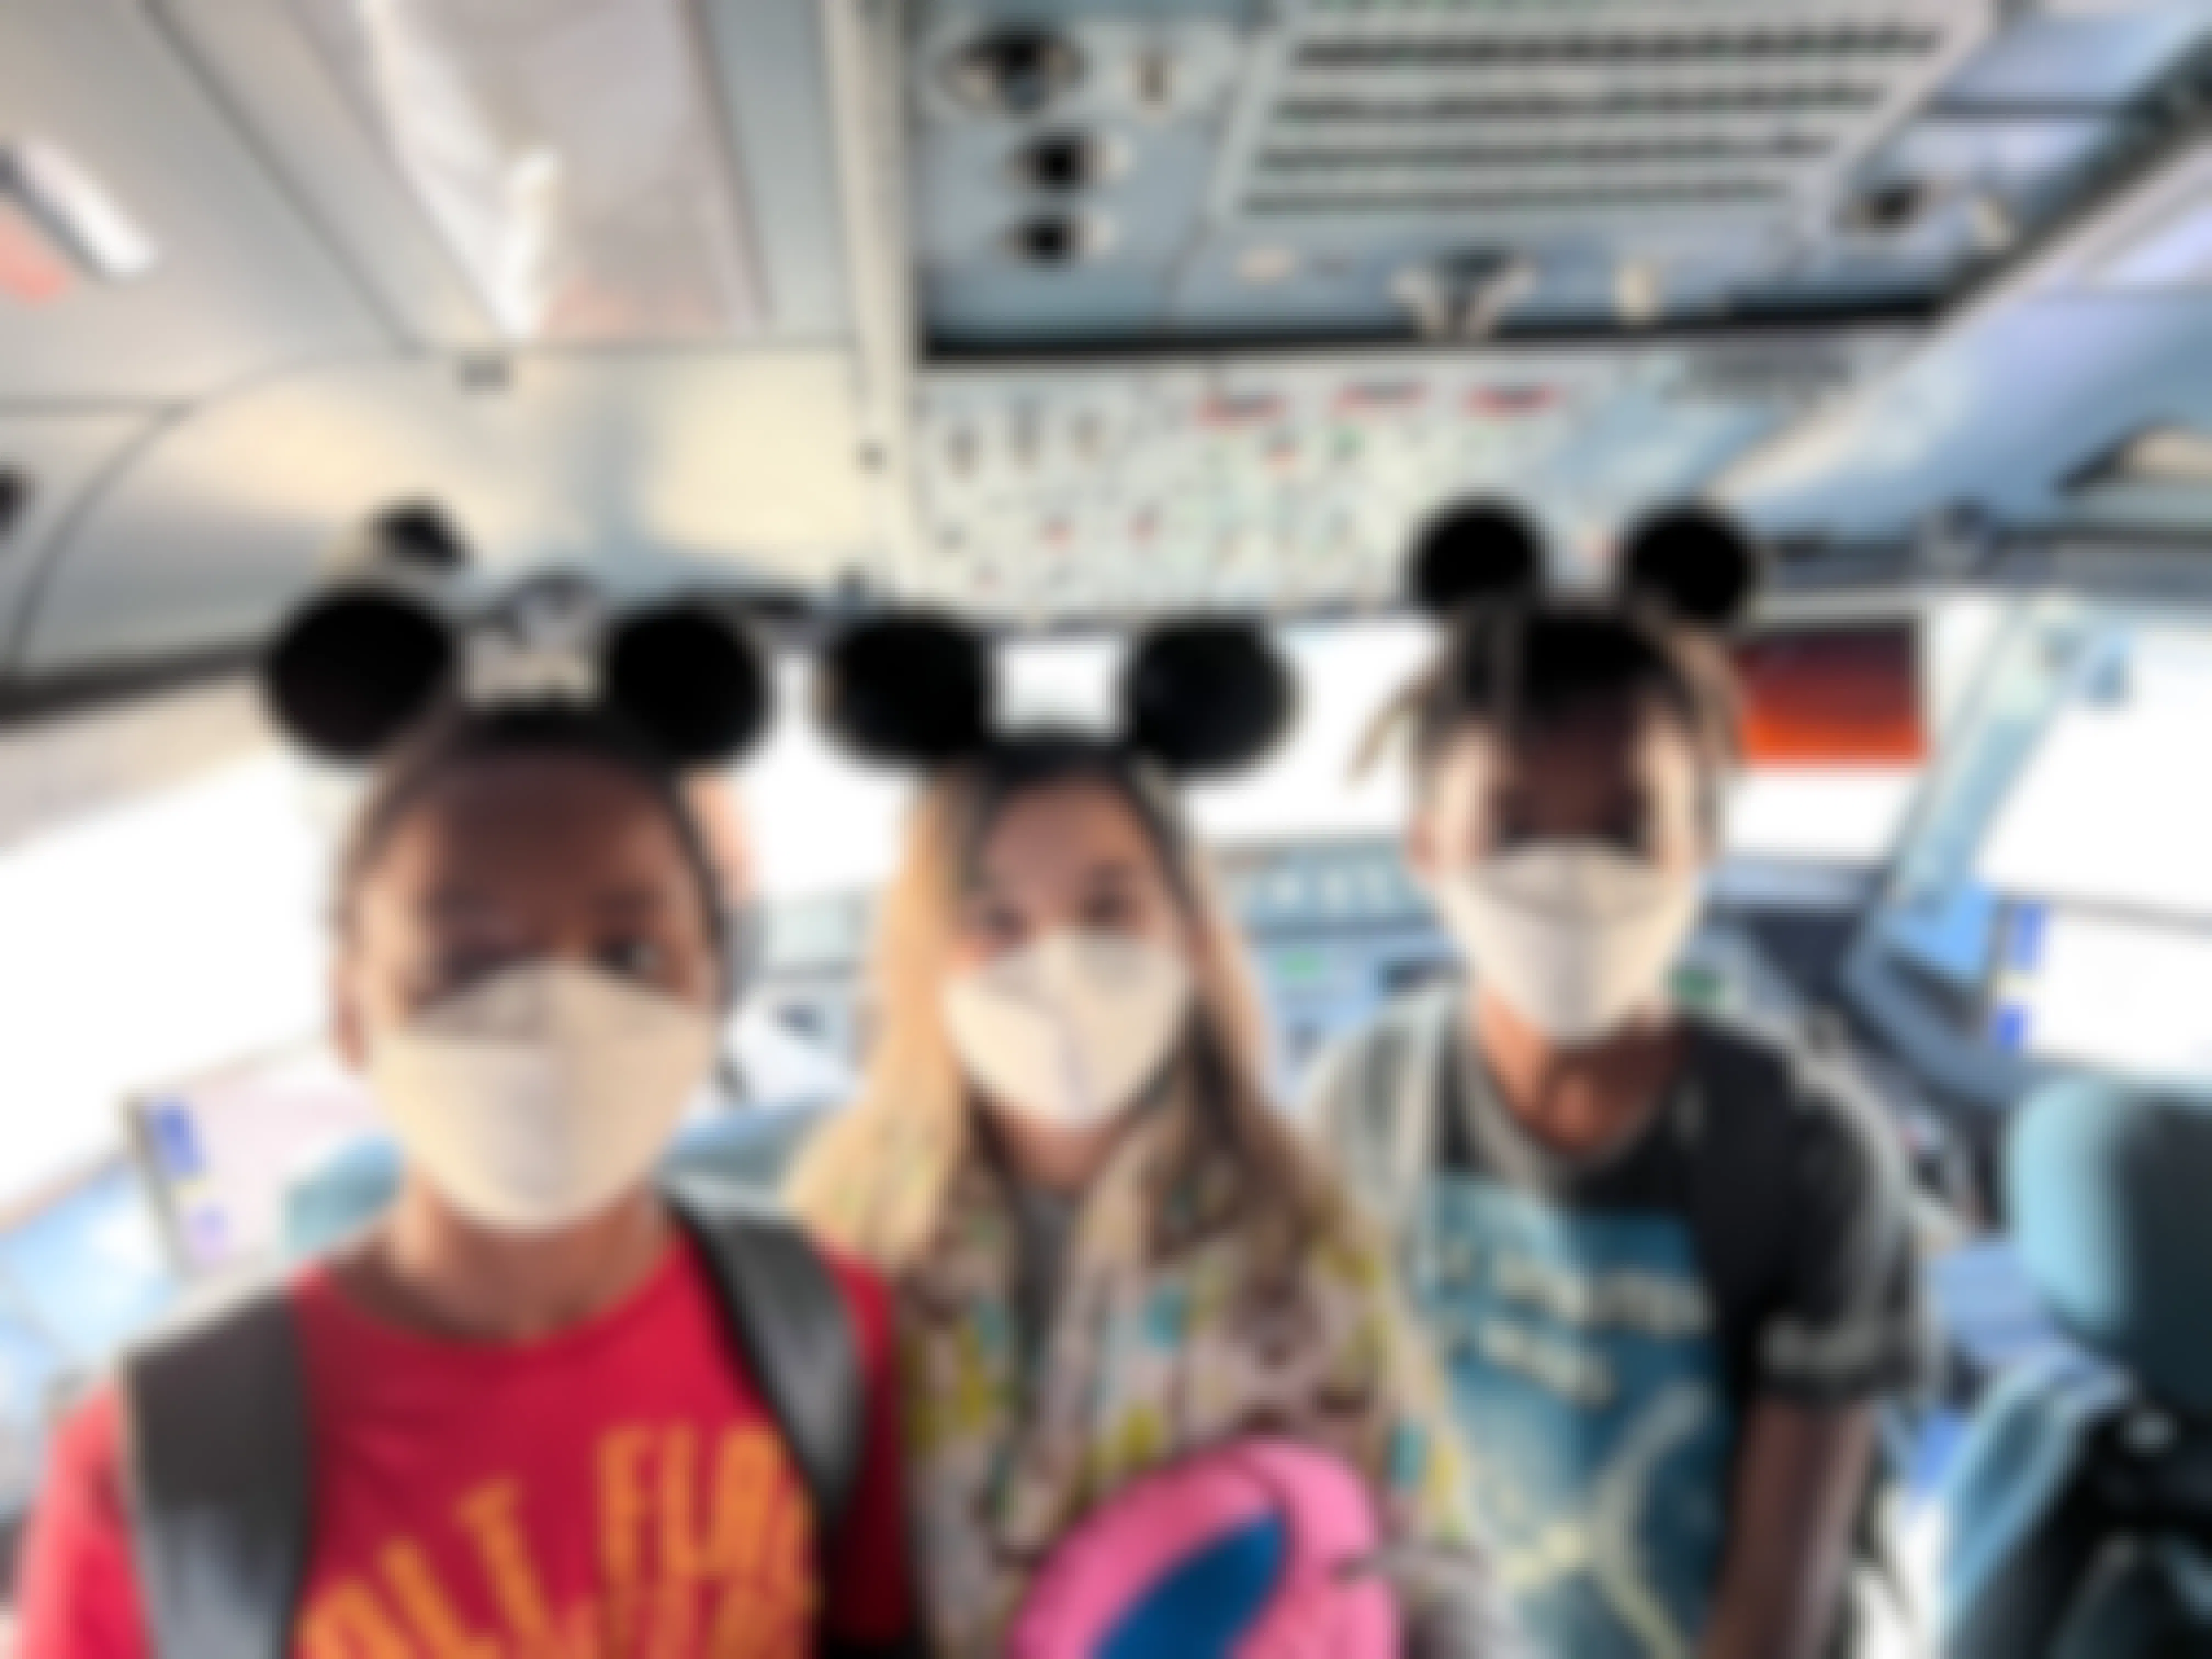 Three children with Mickey Mouse ears standing in the cockpit of a plane.